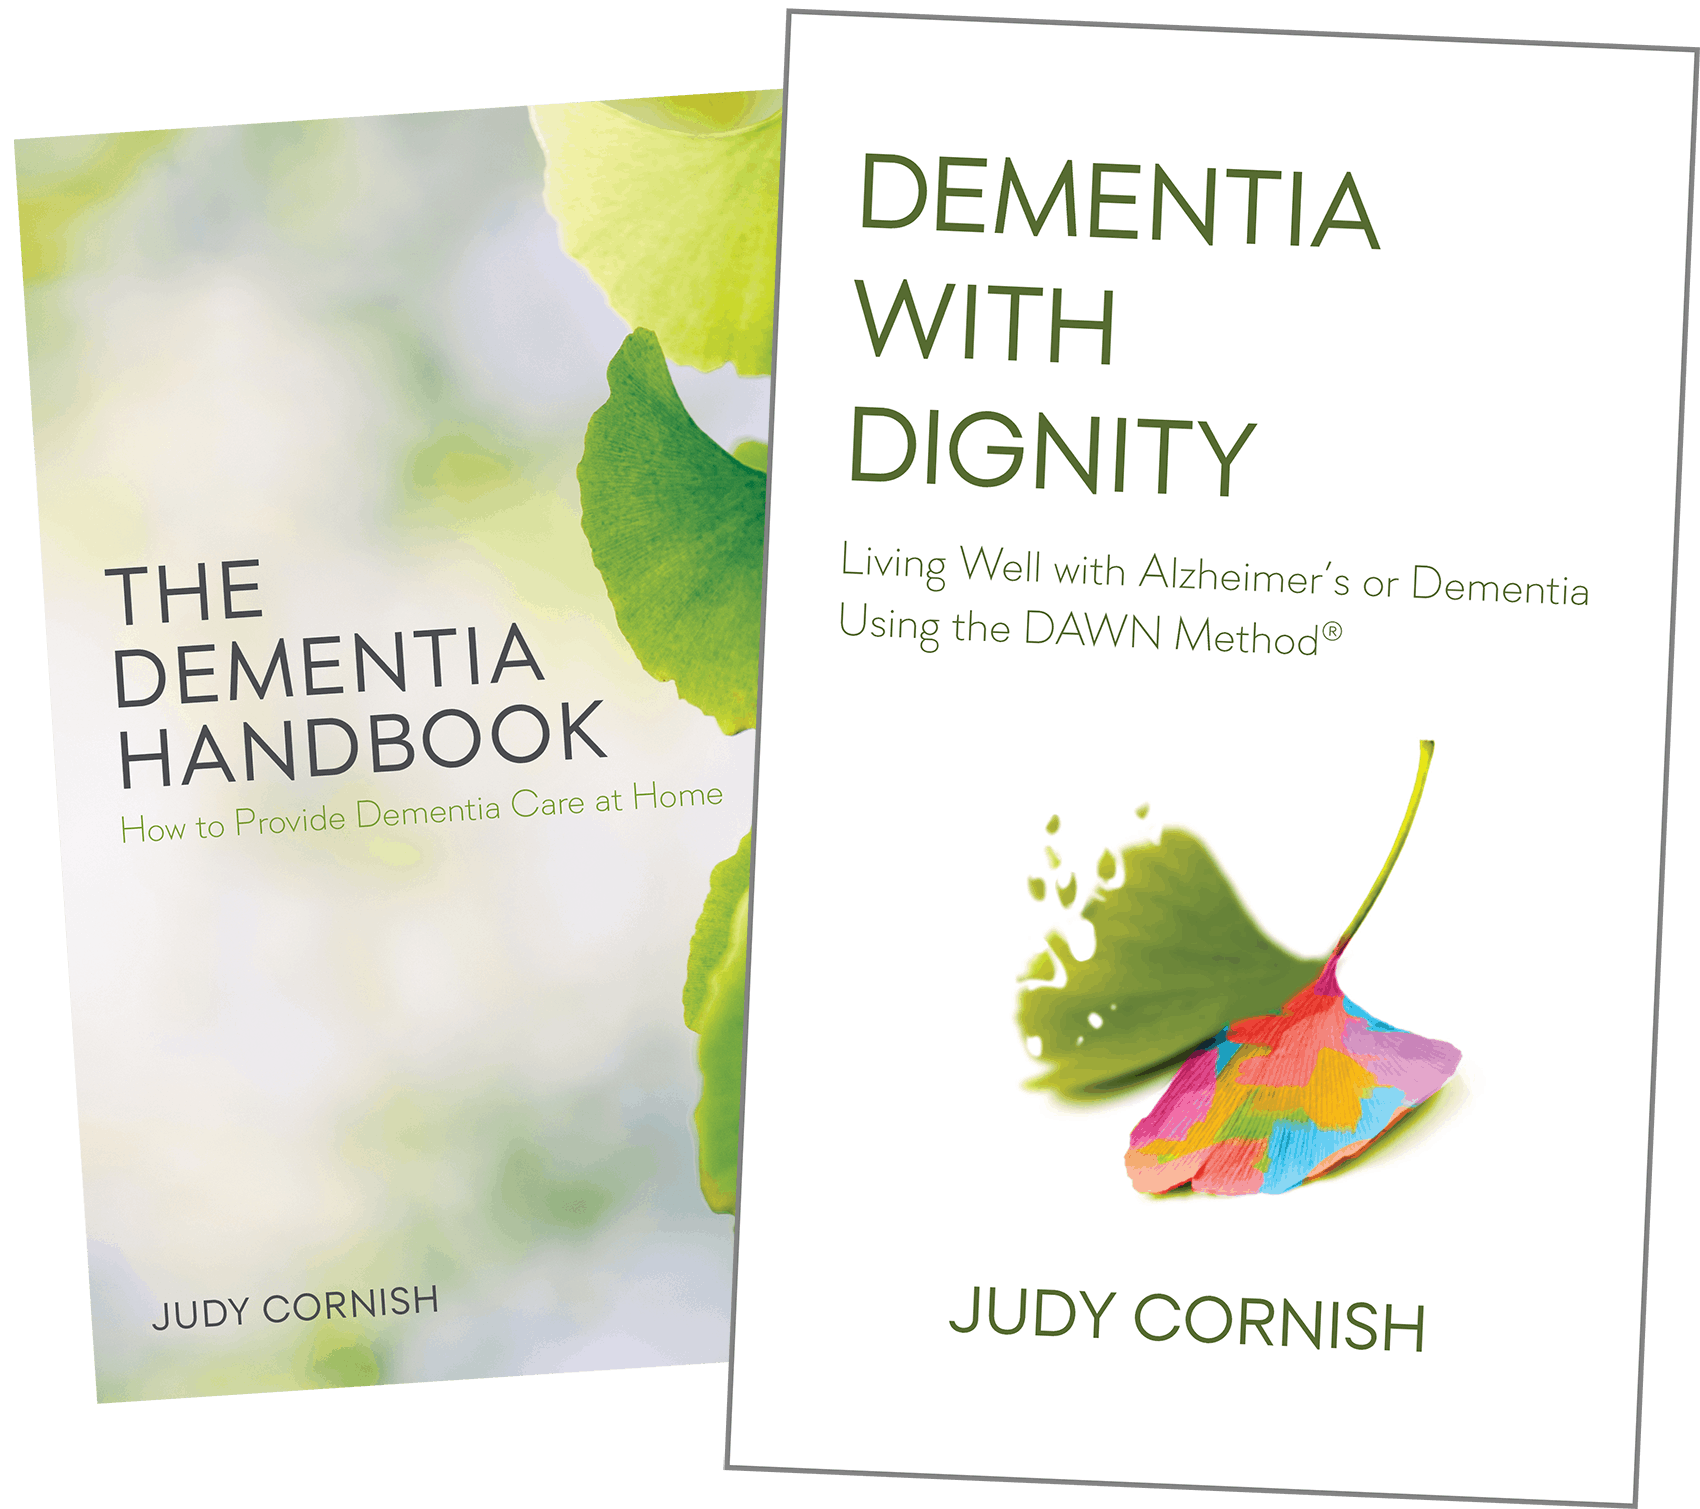 Dementia with Dignity book